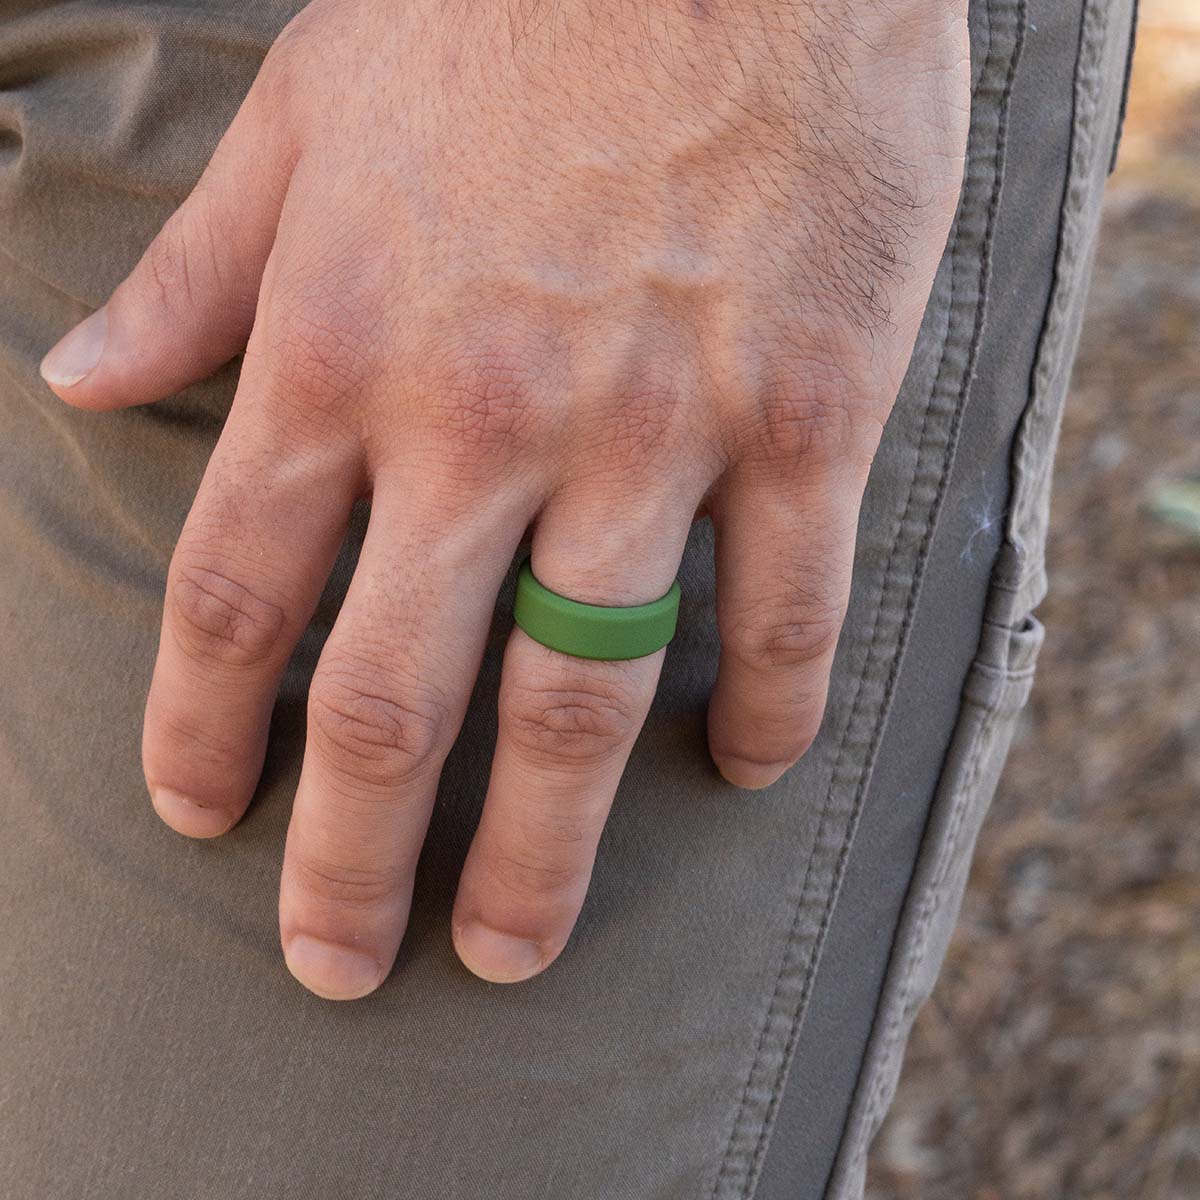 Green rubber ring on a male hand